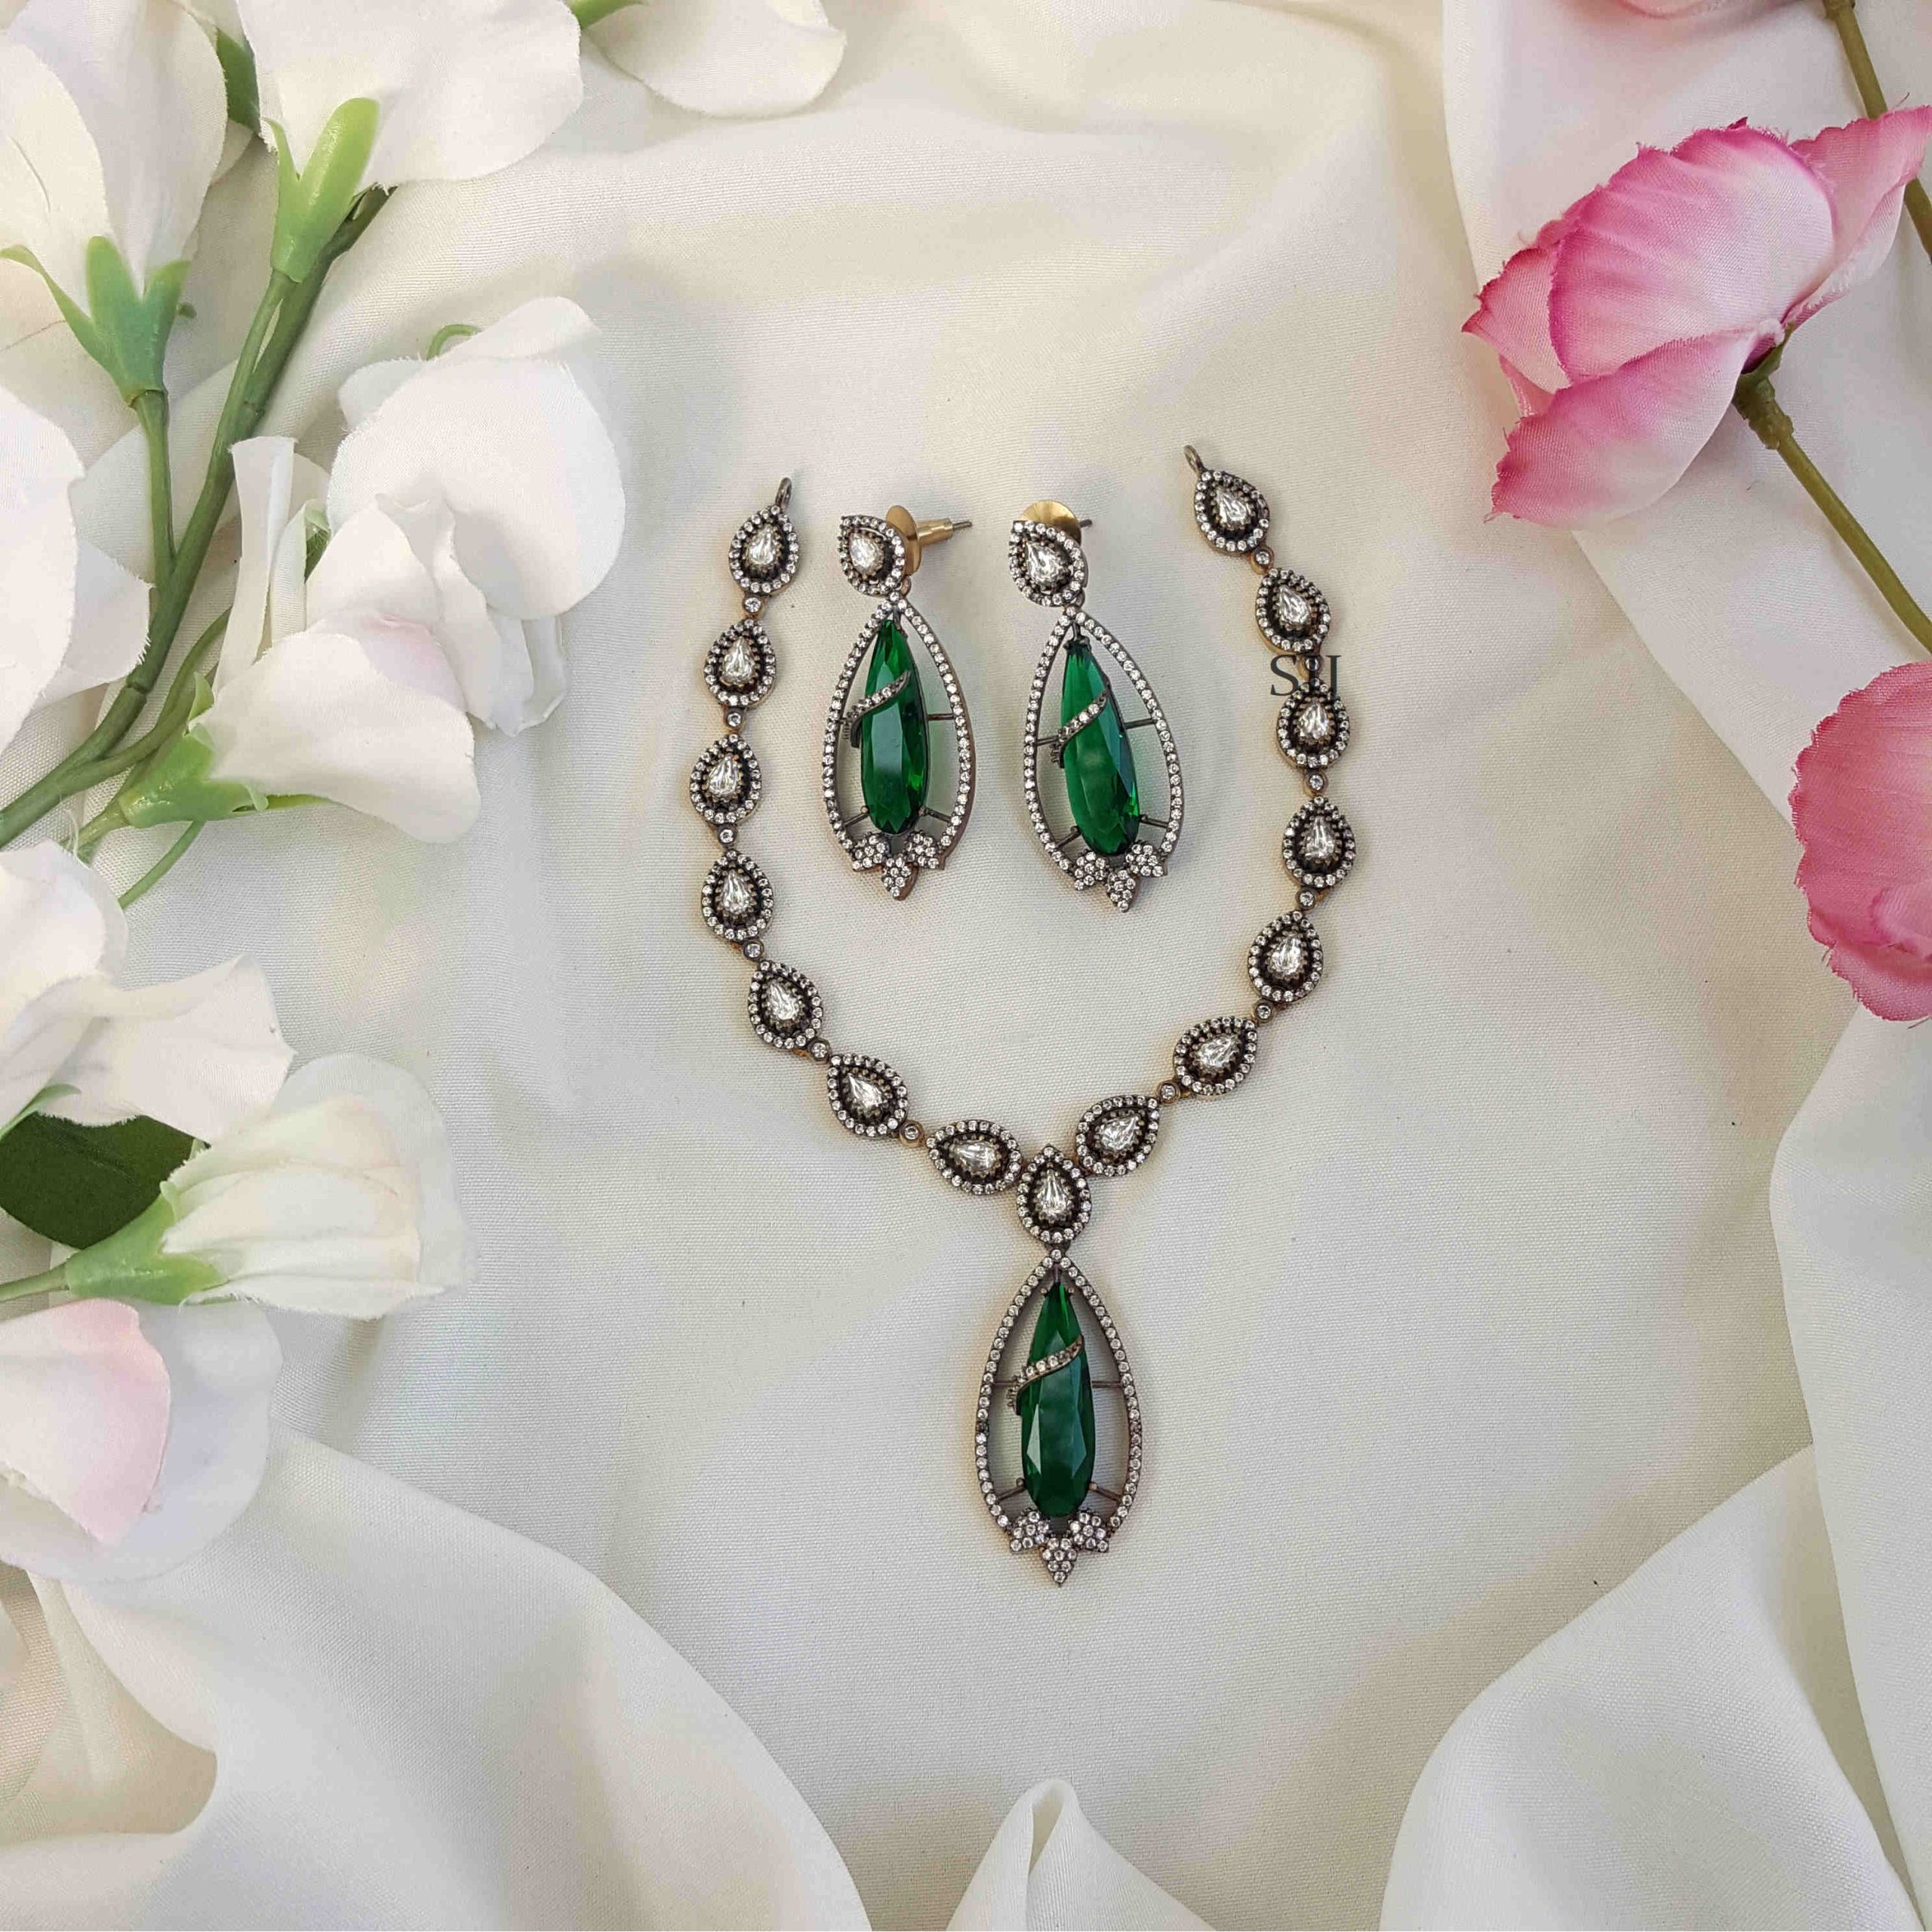 Victorian Emerald and White Stone Tear Drop Necklace